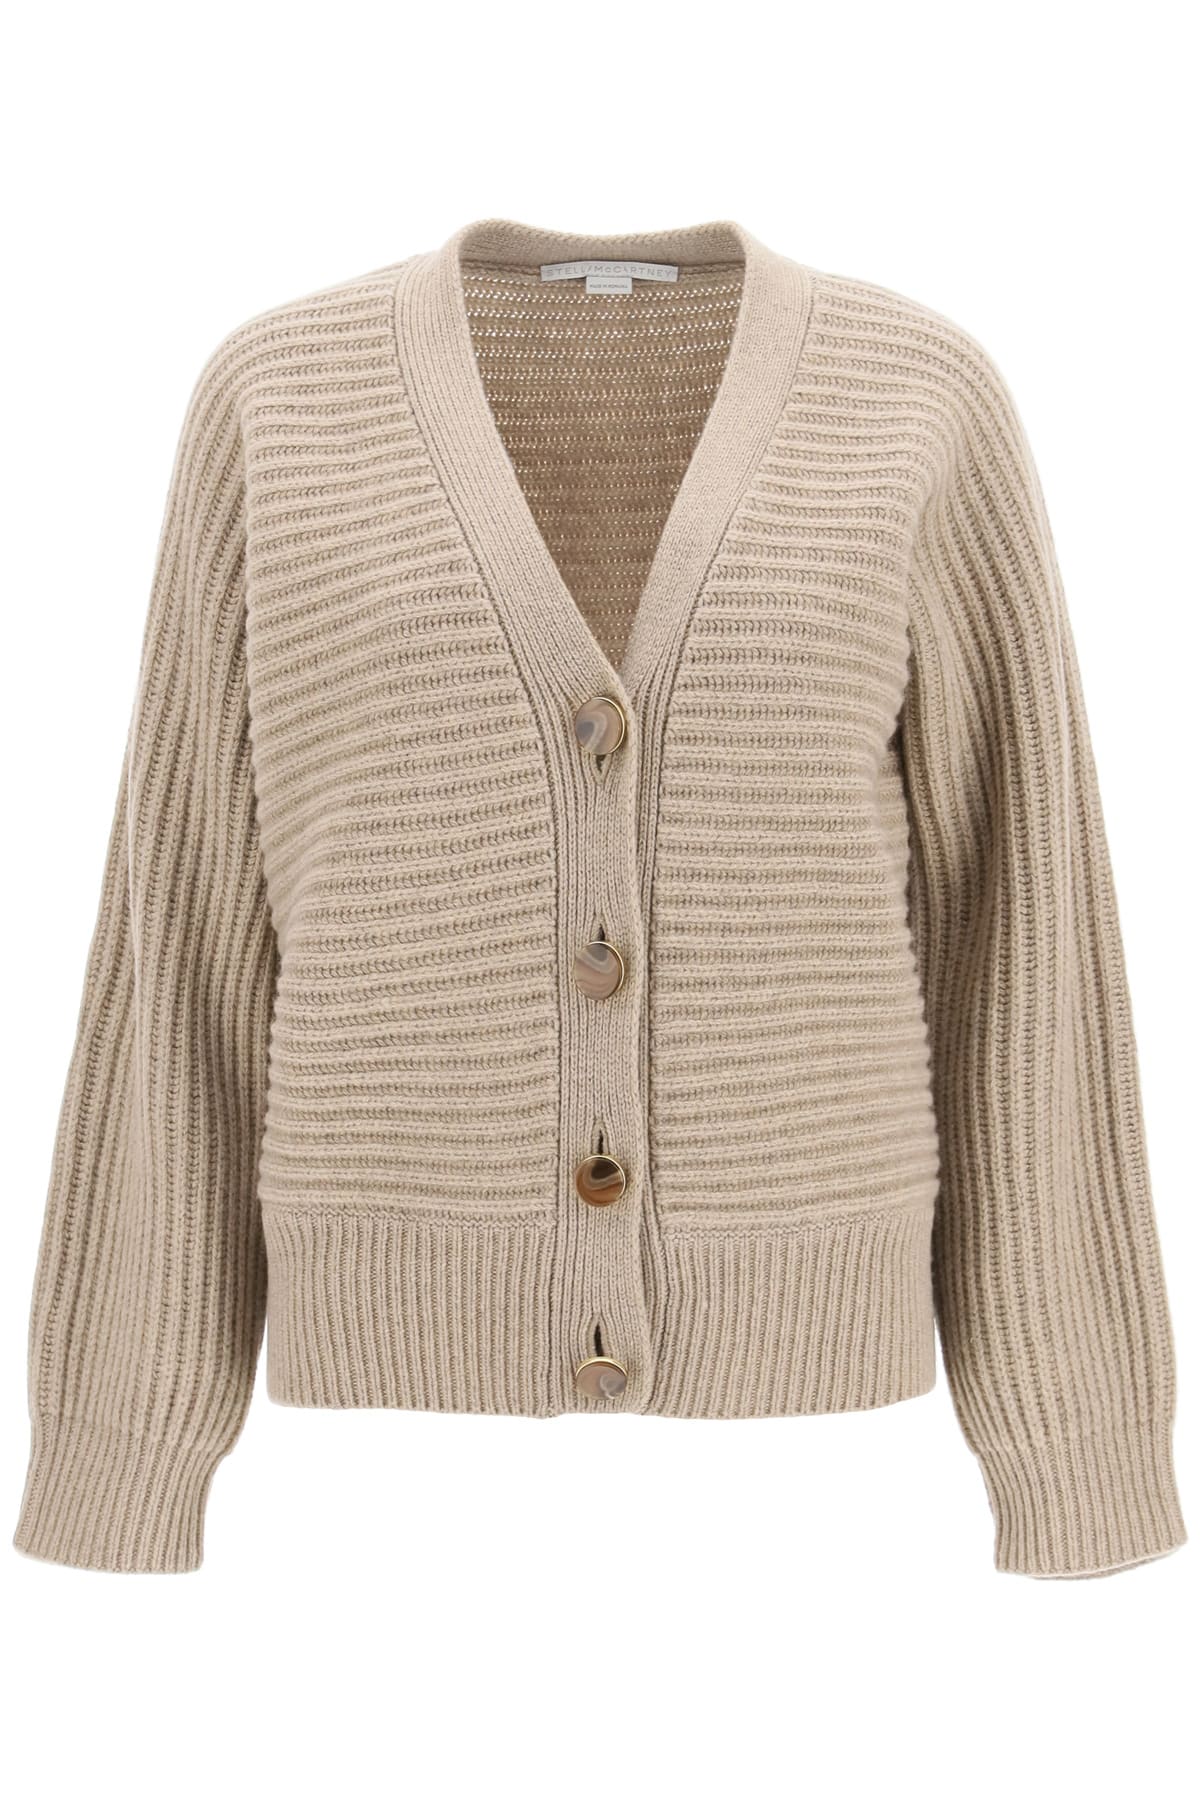 Stella McCartney Forever Cardigan In Cashmere And Wool